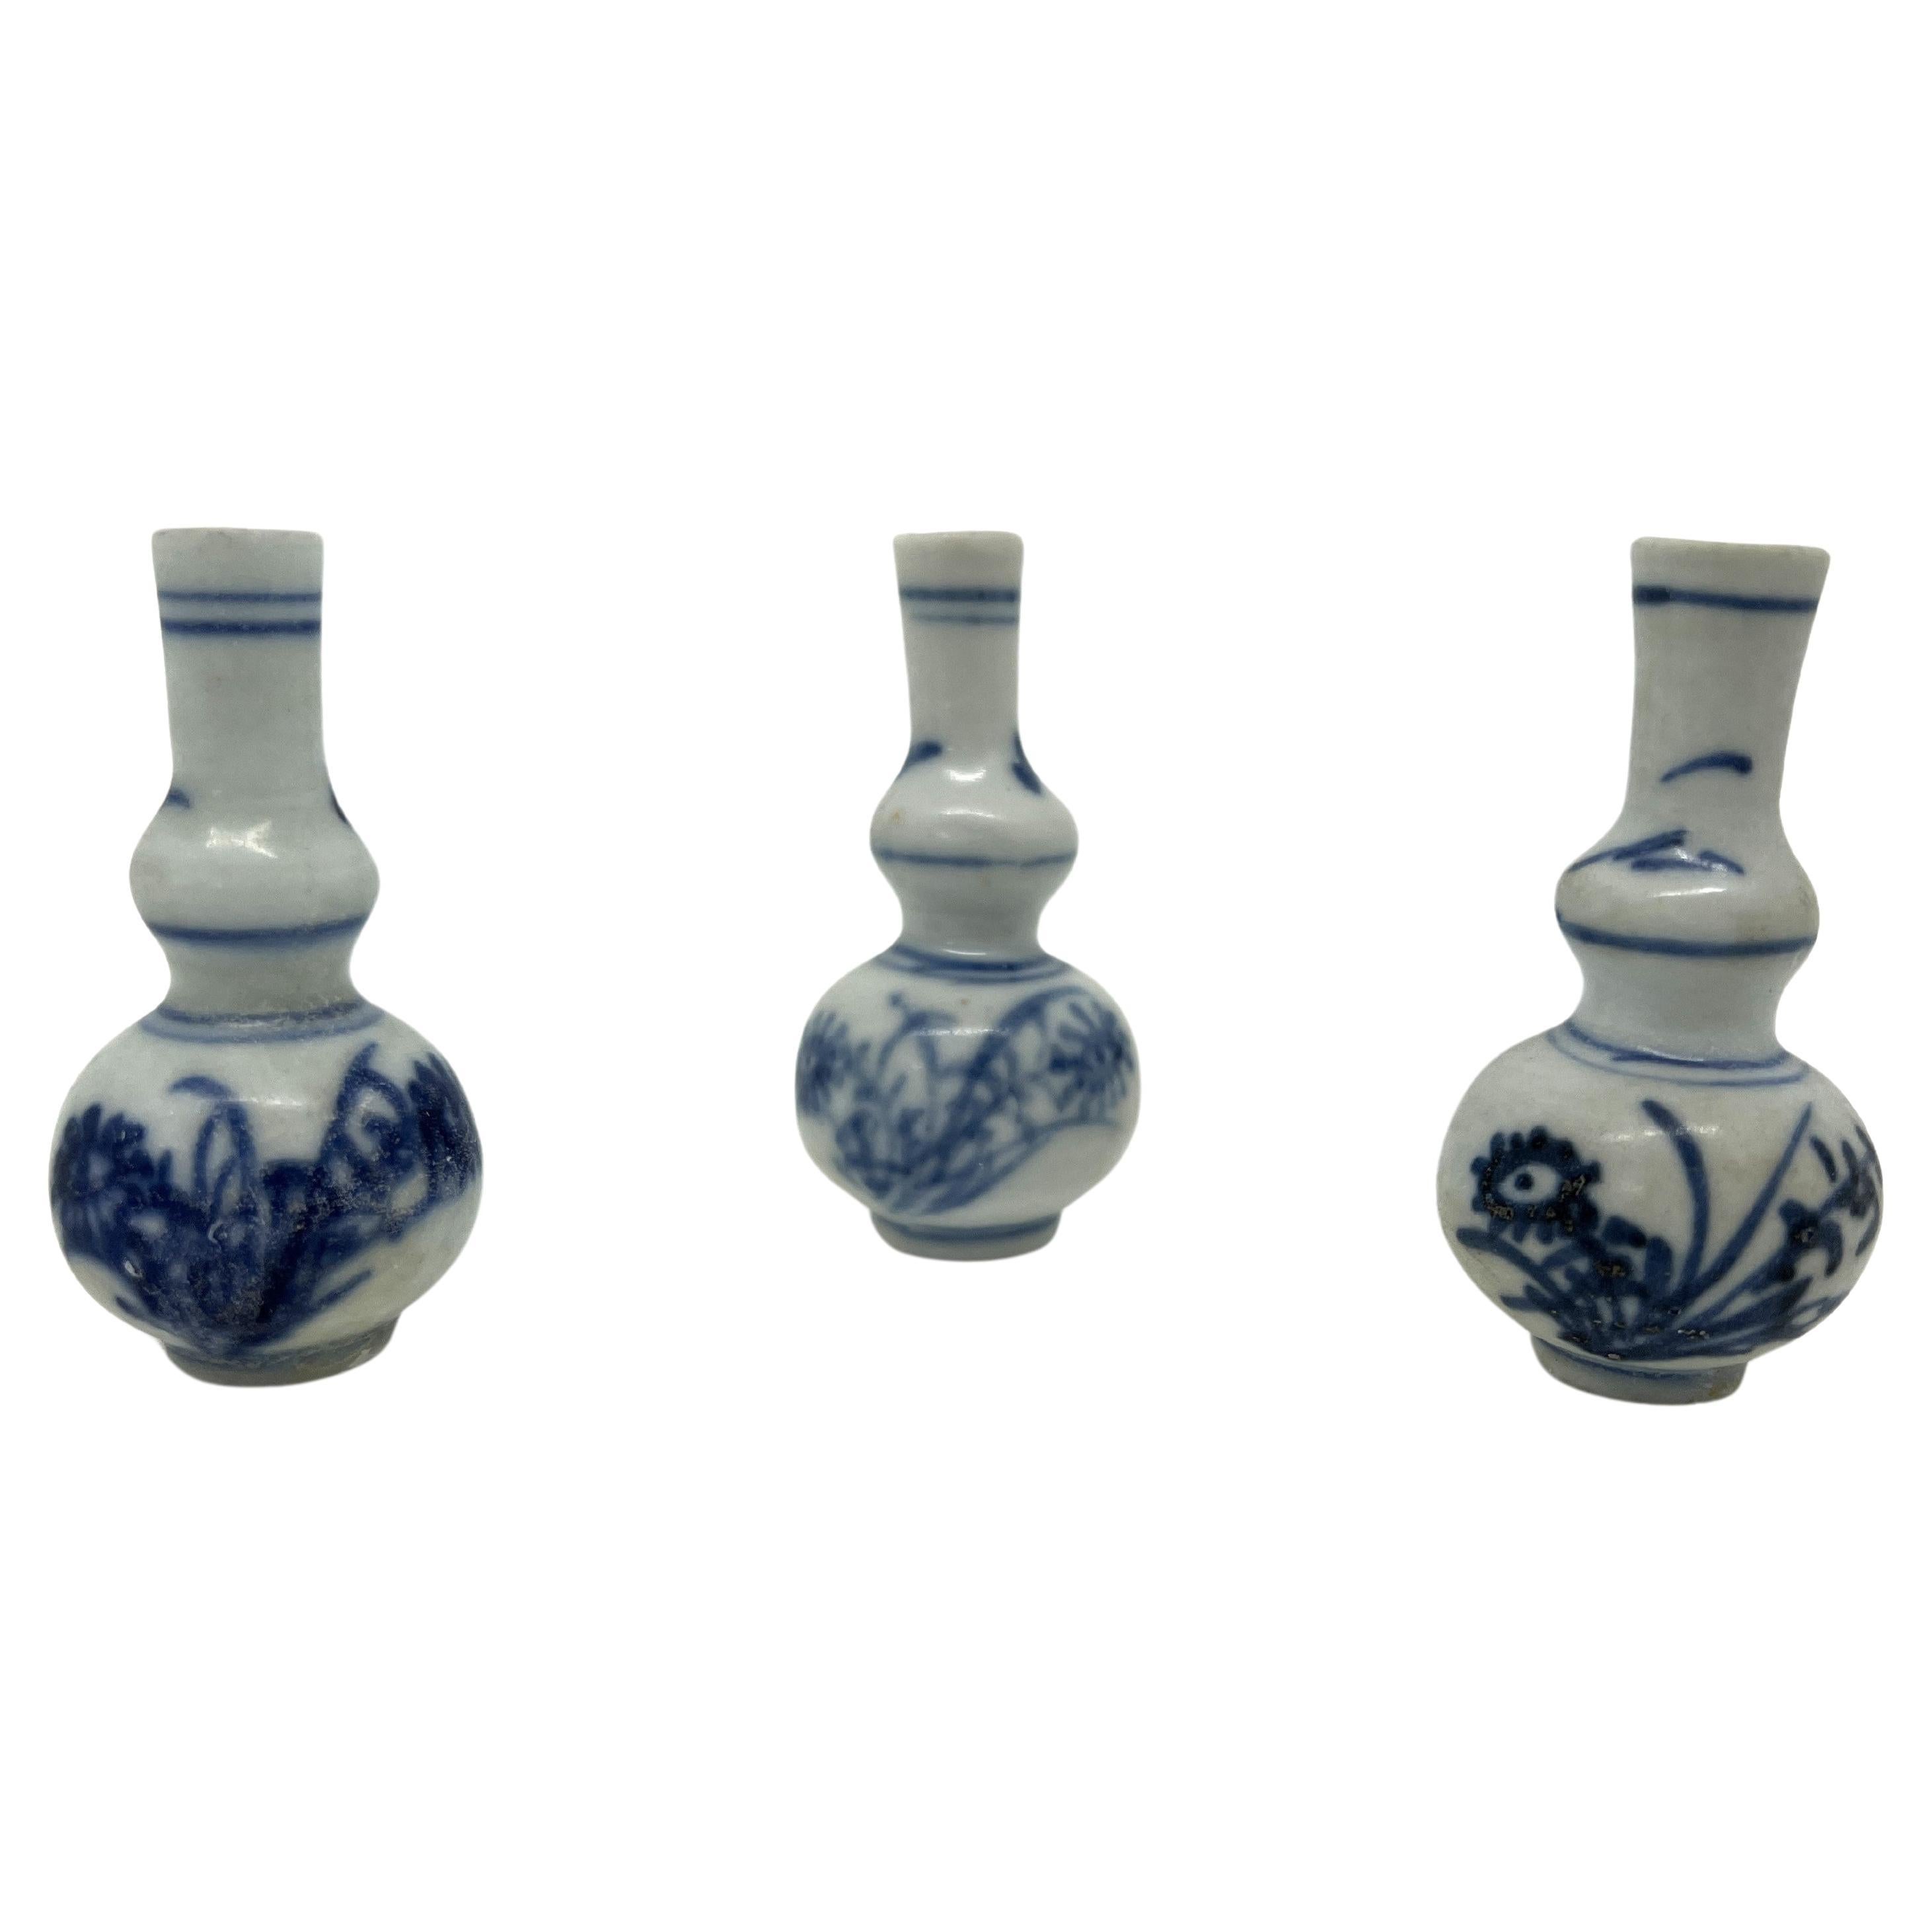 Three Blue and White Miniature Vases, C 1725, Qing Dynasty, Yongzheng Era For Sale